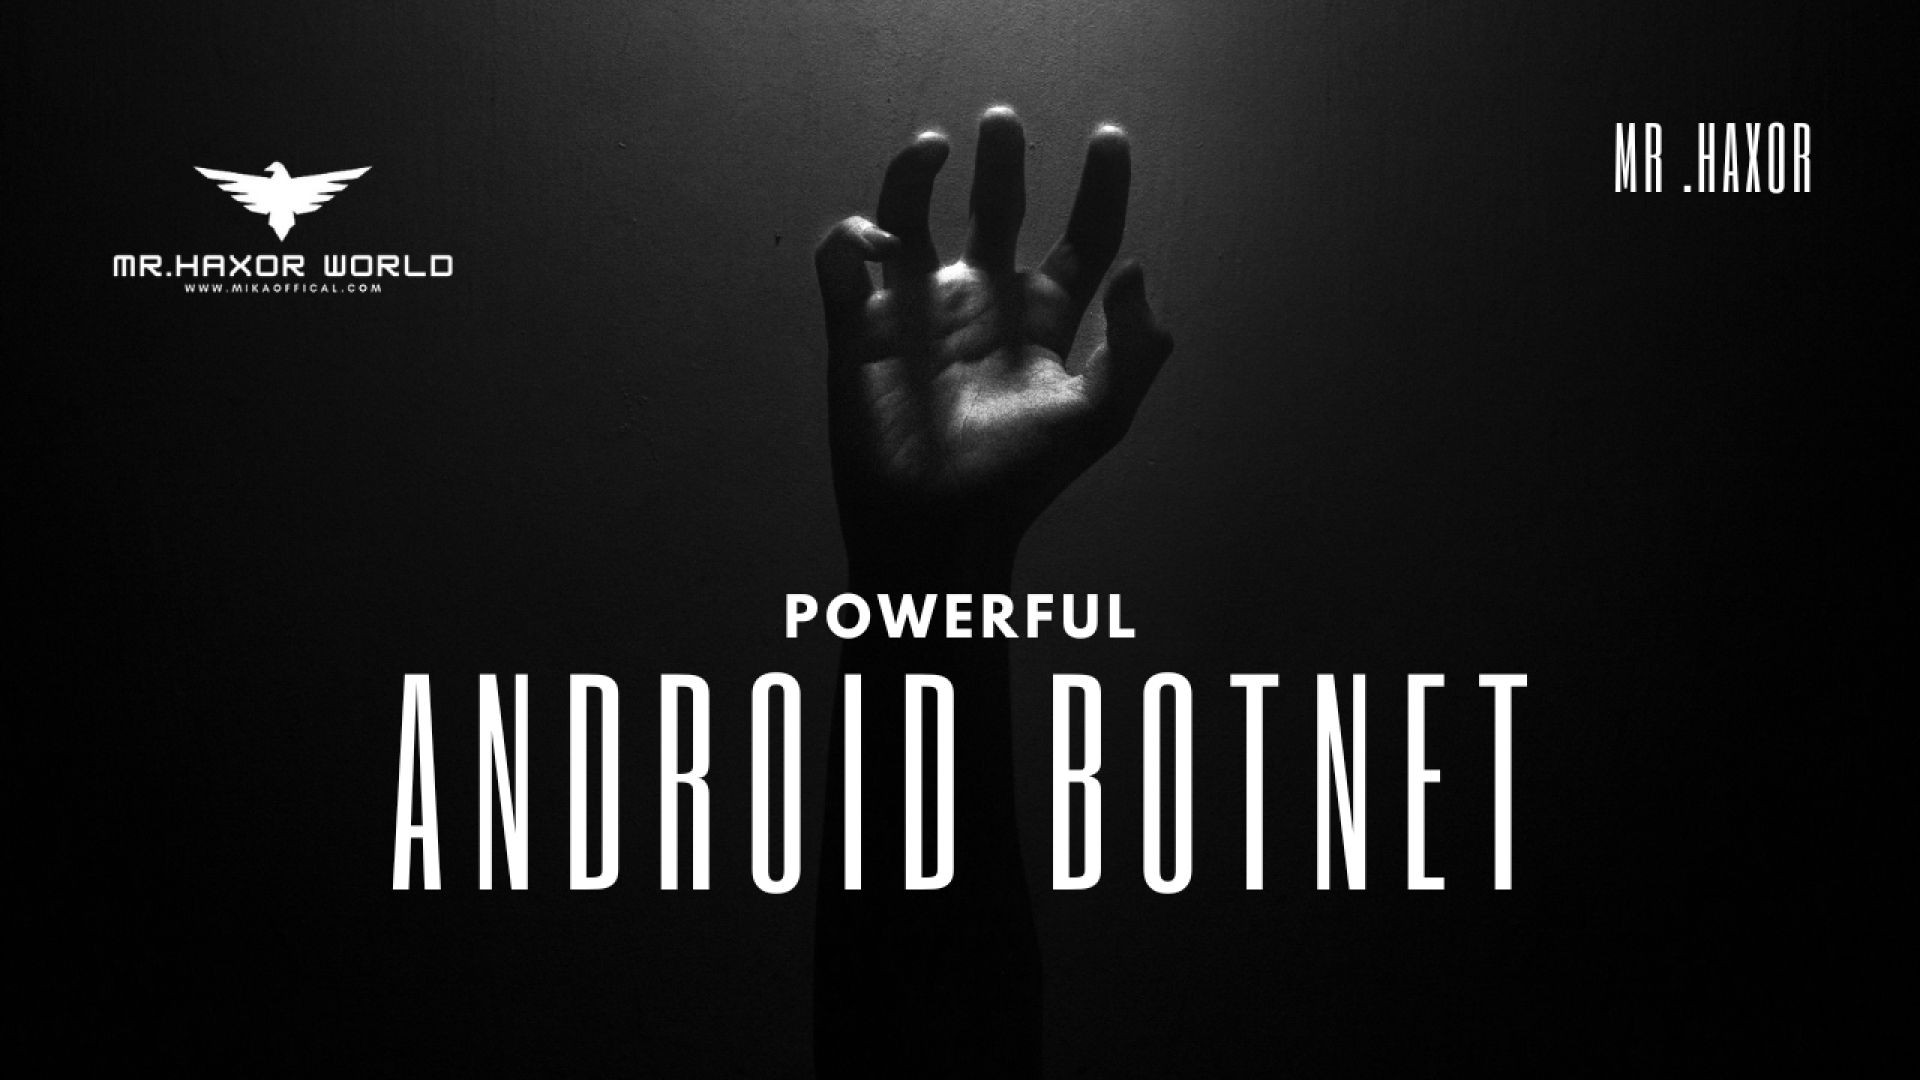 Powerful Android Hacking Botnet | By MR.HAXOR | Android Botnet | Android Hacking Tool